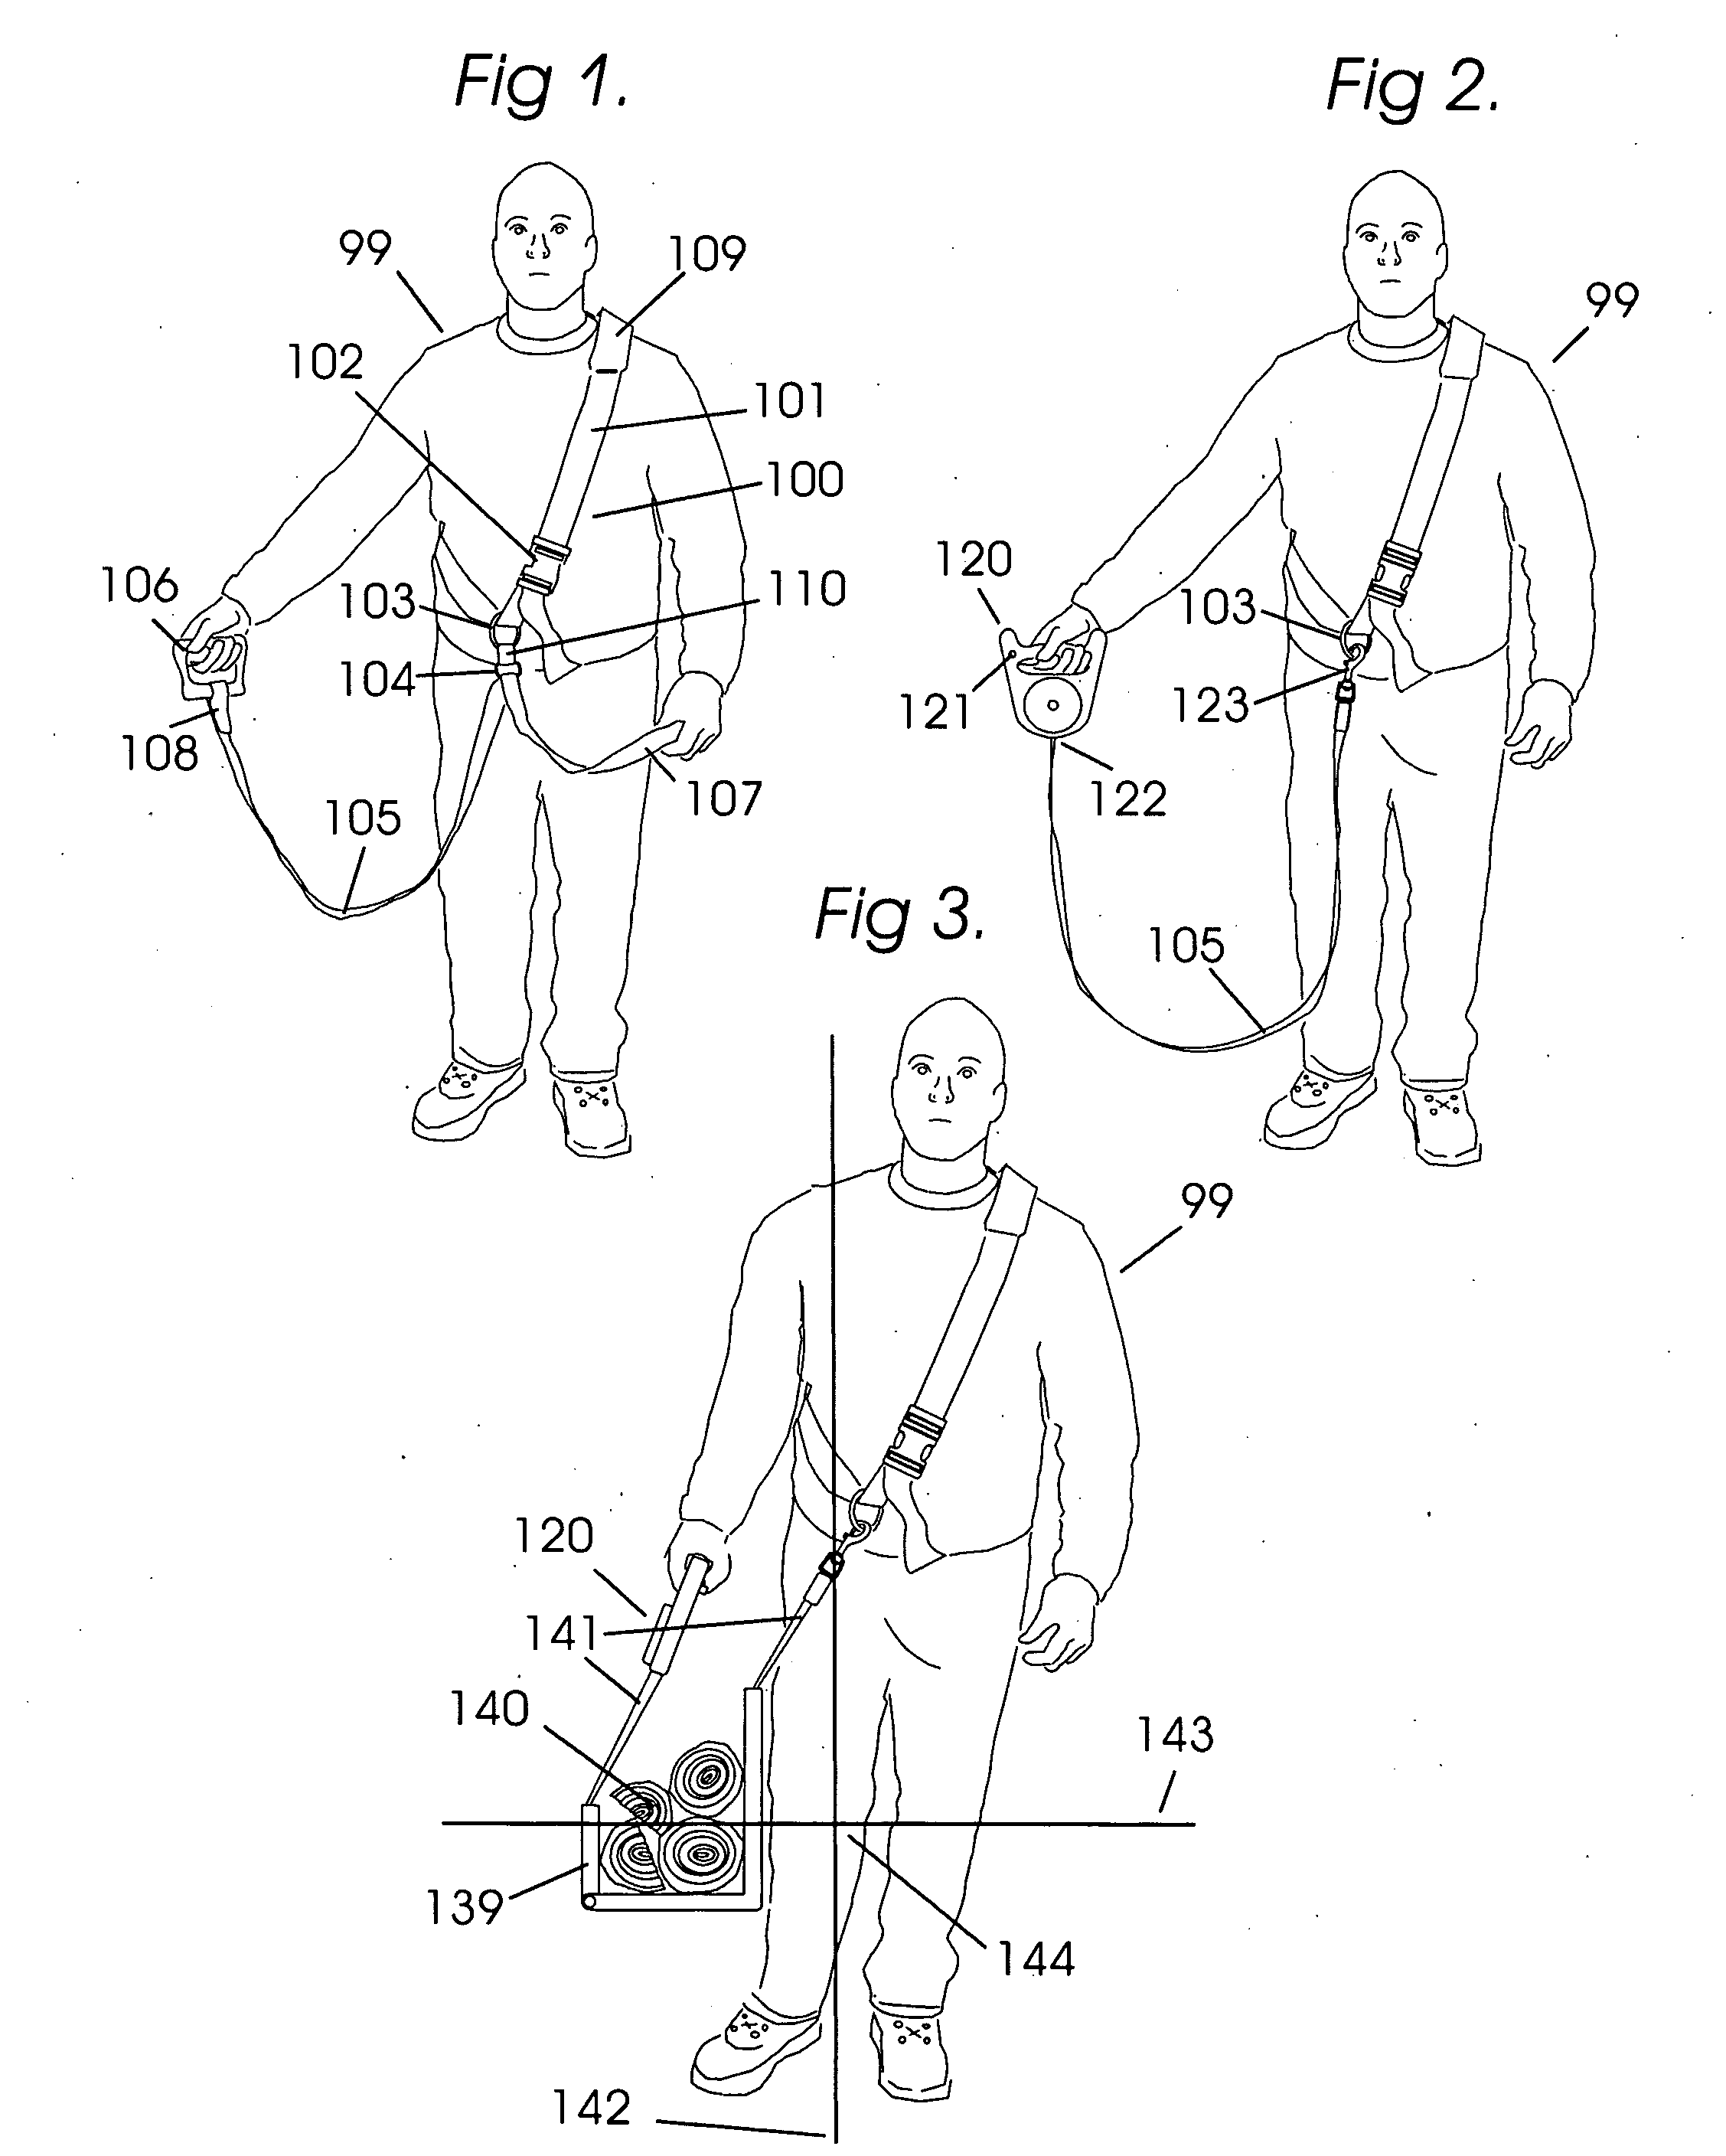 Machine and process for personal, side mounted biomechanically engineered lifting device; a means of lifting awkward and heavy loads